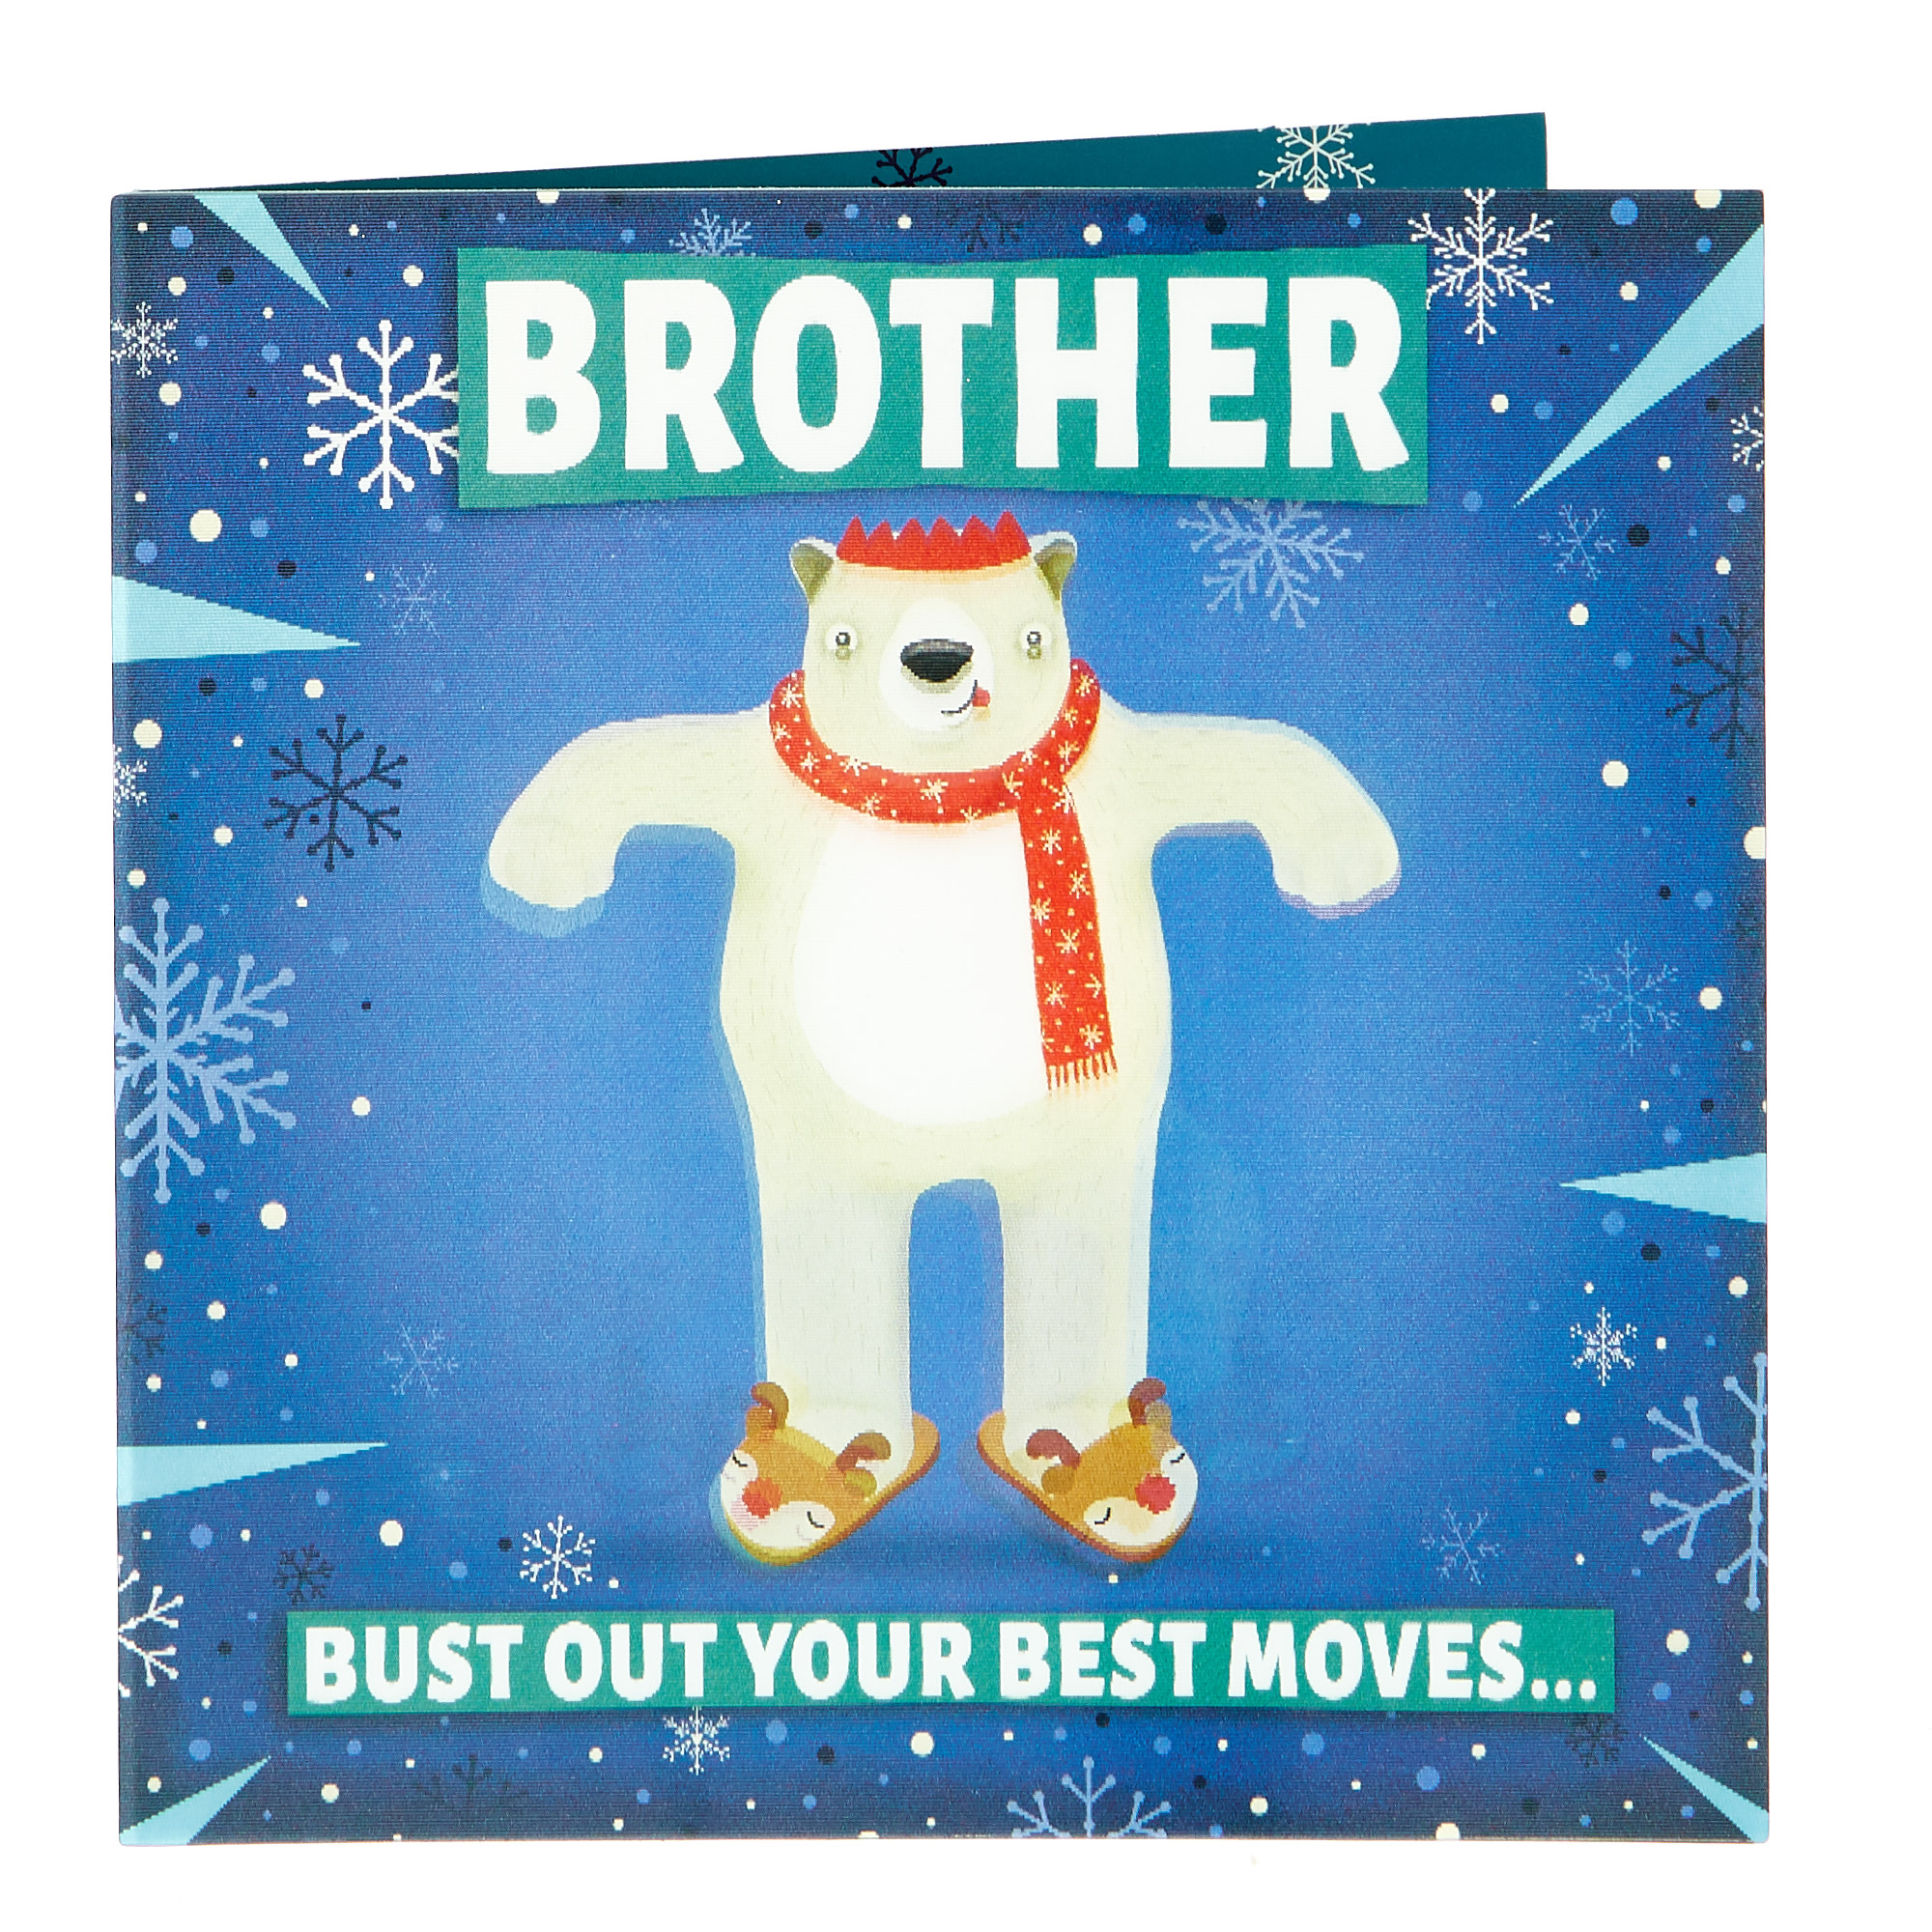 Hologram Christmas Card - Brother Bust out Your Moves